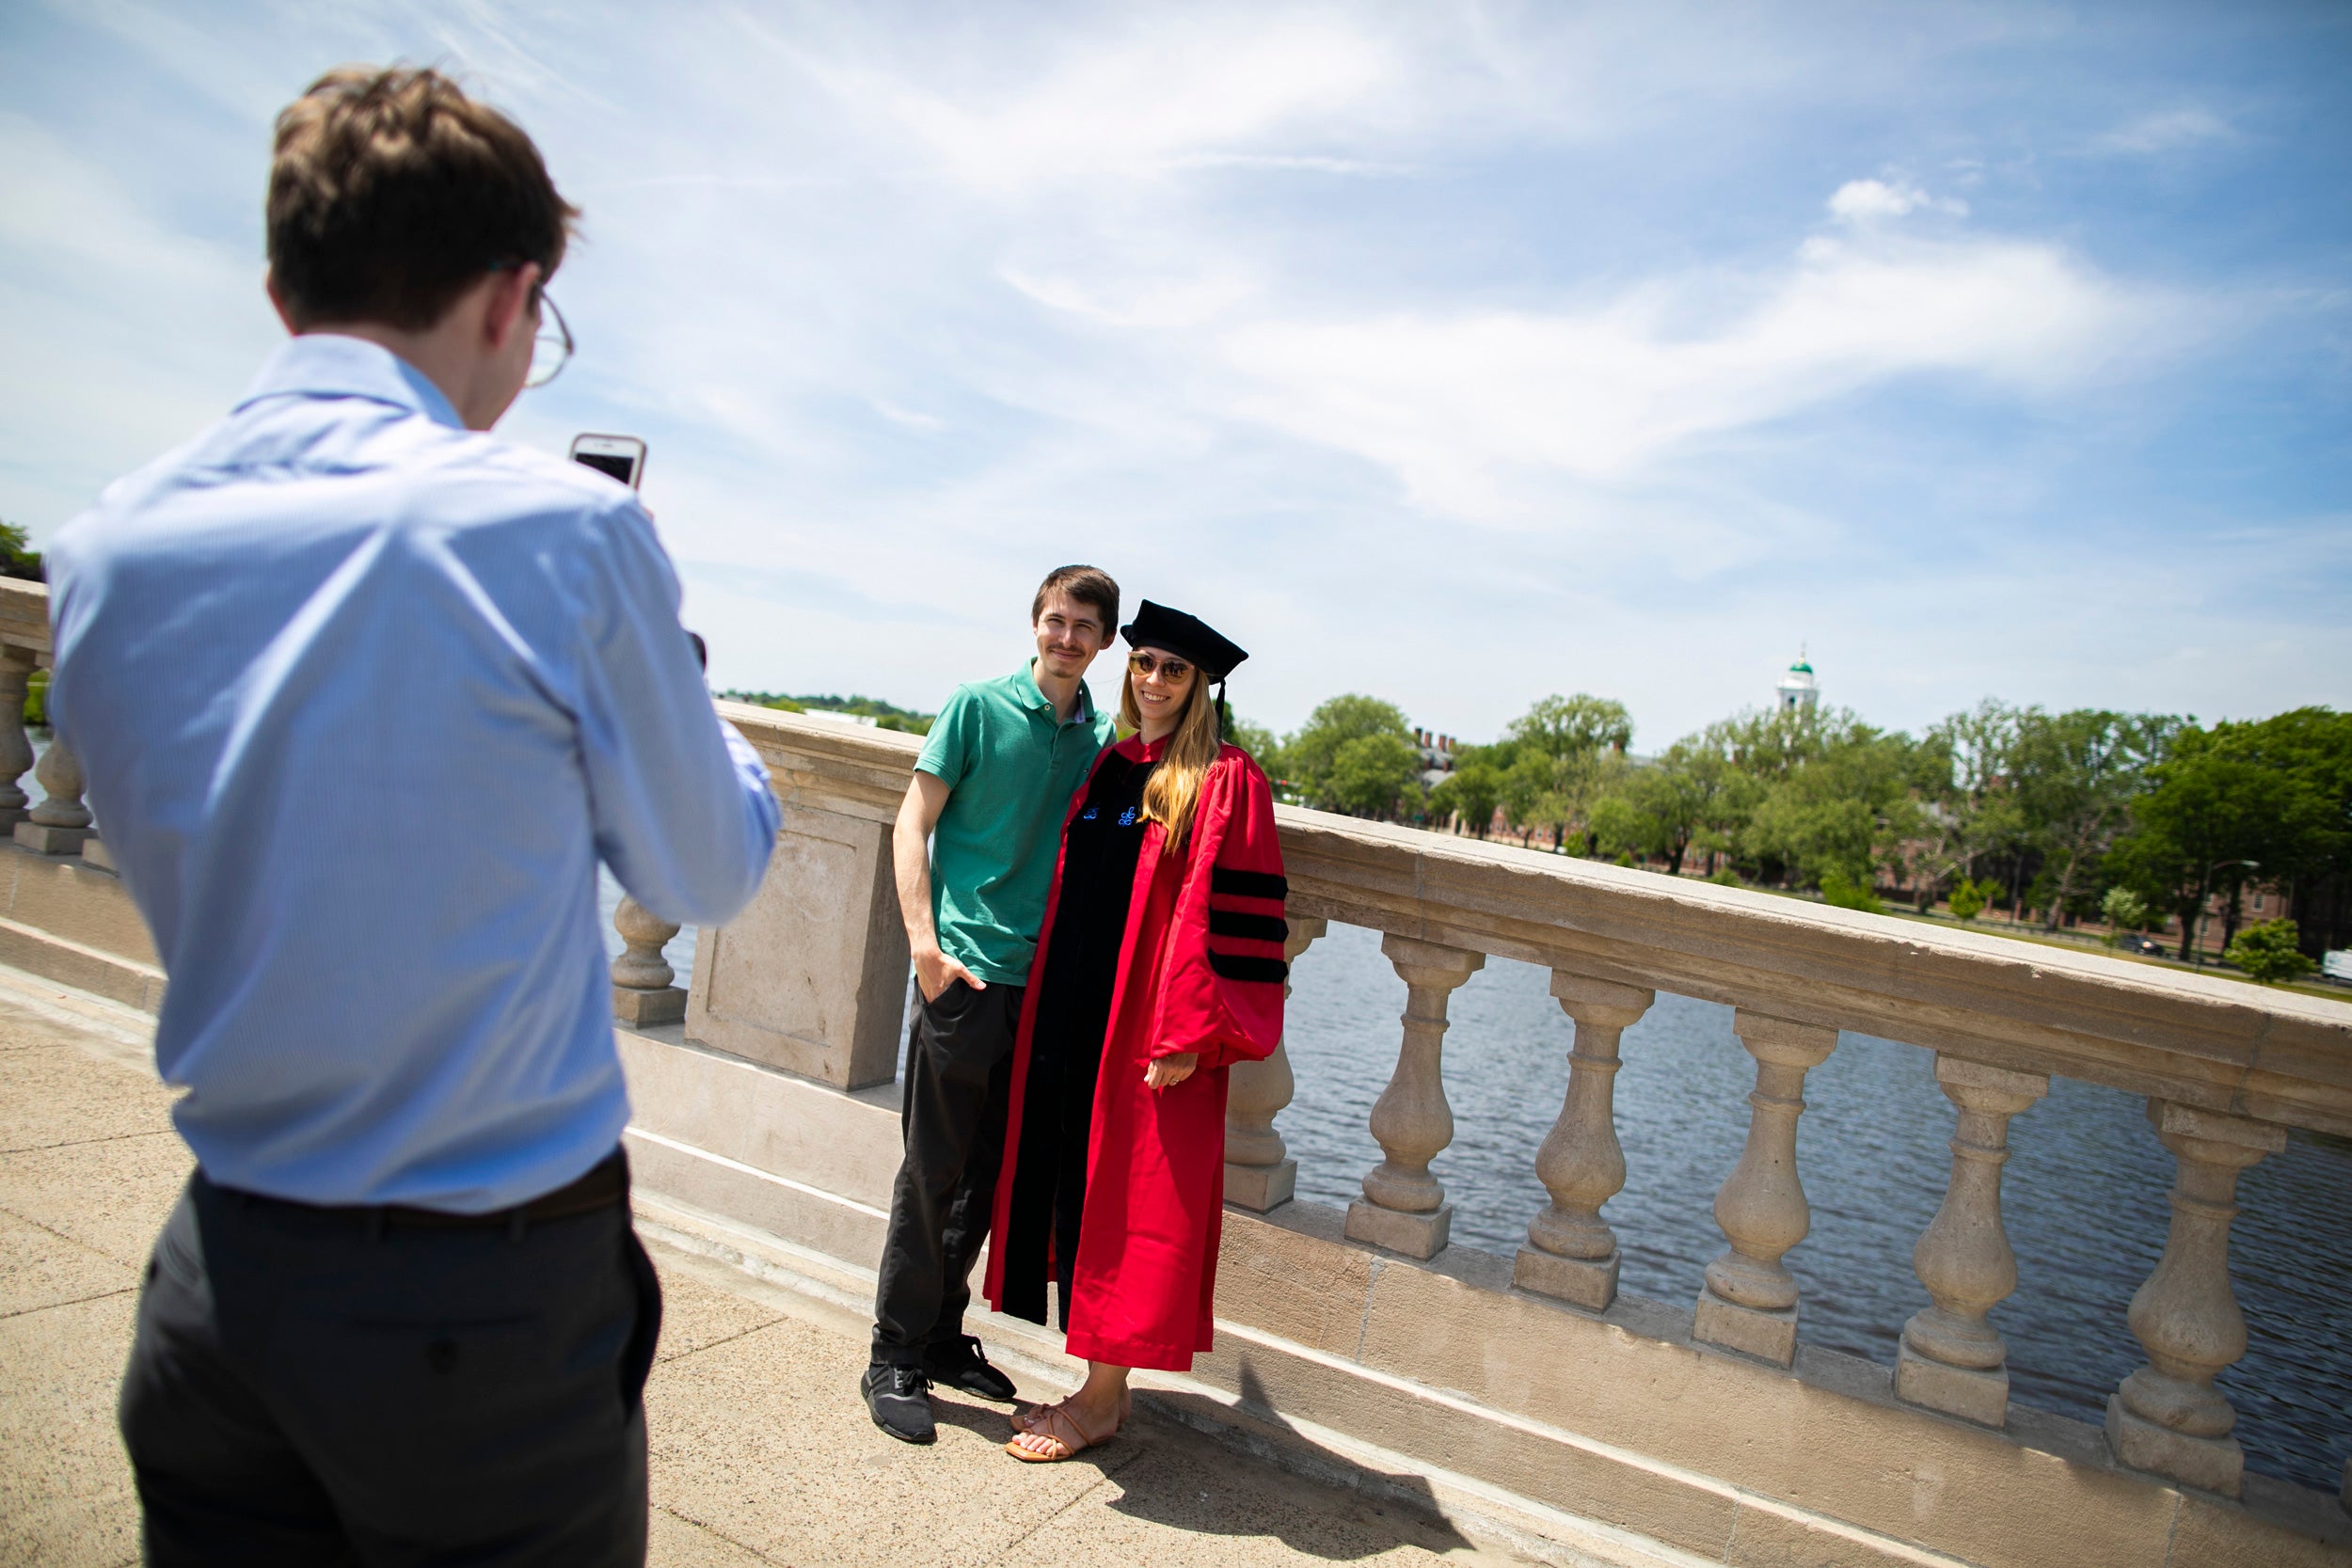 Brianna Duncan-Lowey (right), who graduated with a Ph.D. in virology, is pictured with her brother, Colin, on the Weeks Footbridge following the Morning Exercises.